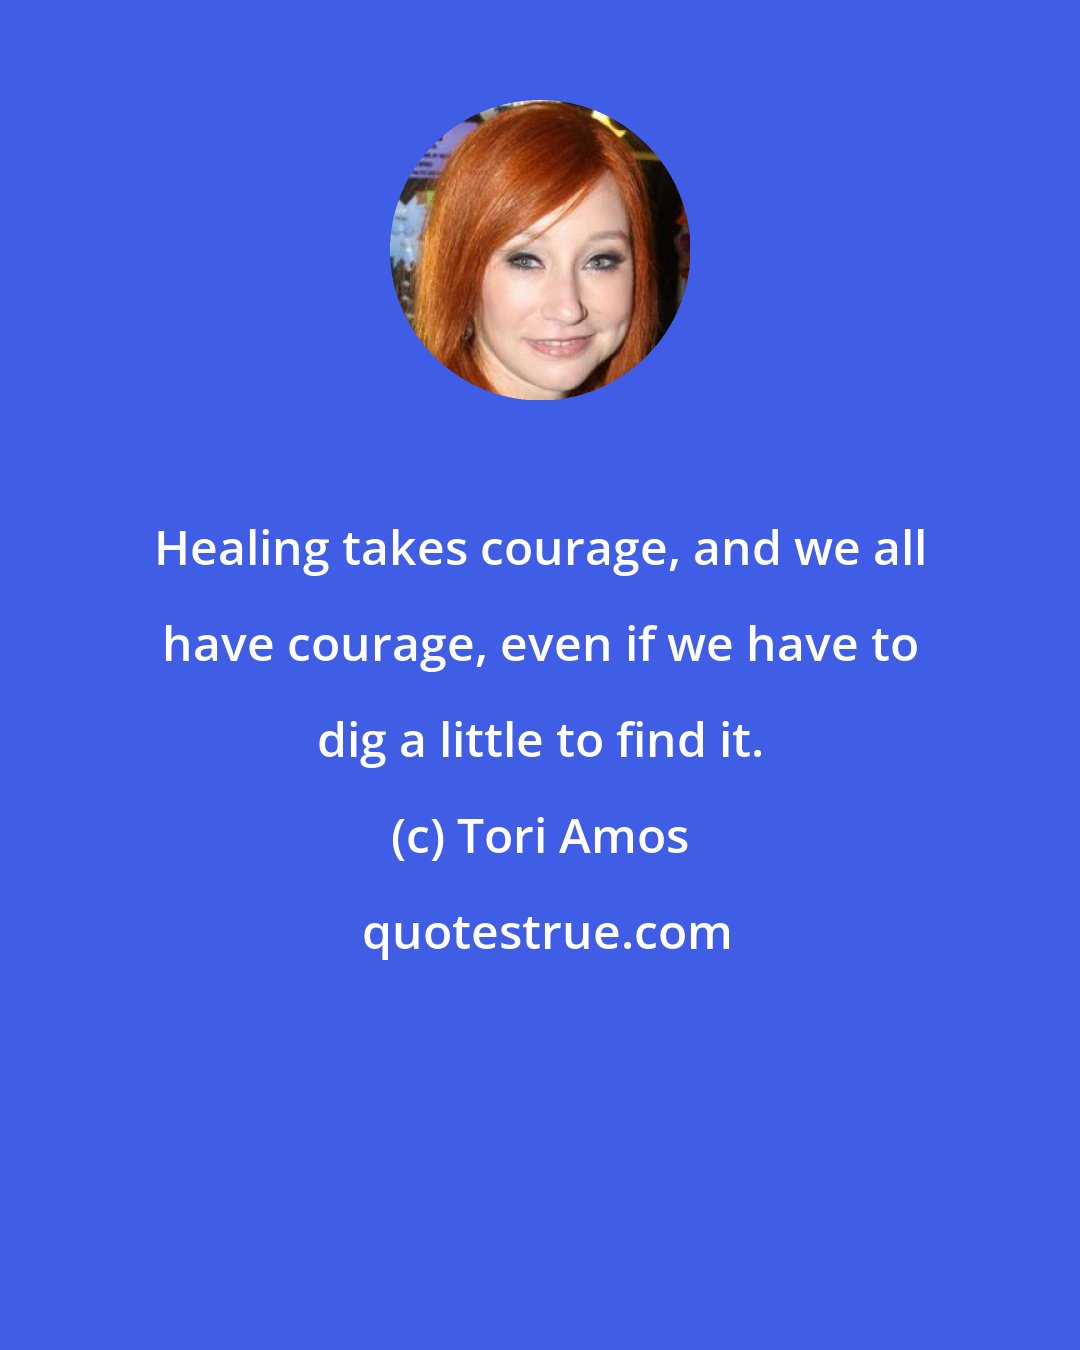 Tori Amos: Healing takes courage, and we all have courage, even if we have to dig a little to find it.